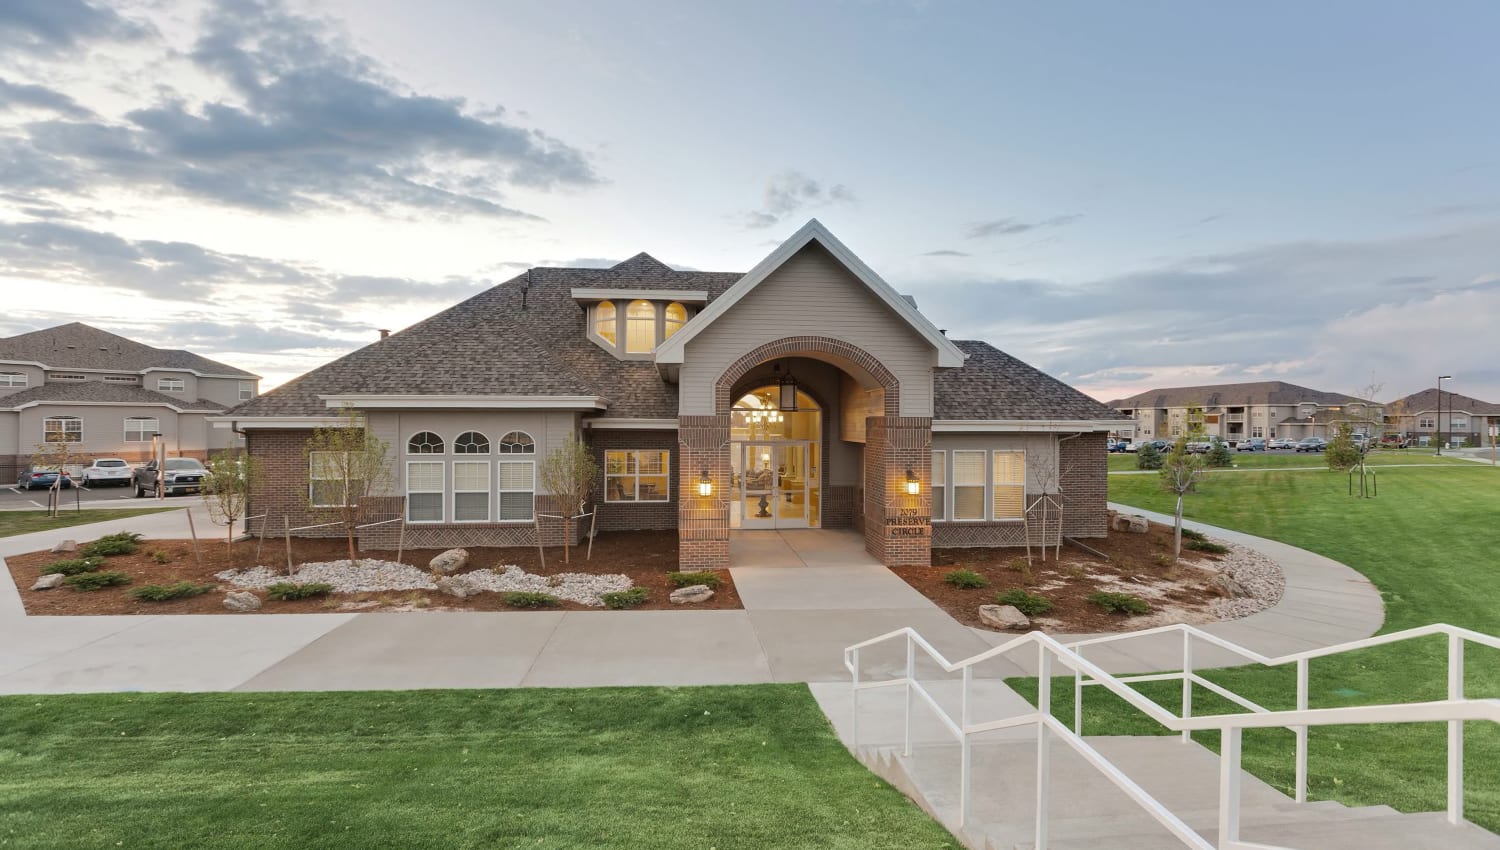 Exterior of the clubhouse at The Preserve at Greenway Park in Casper, Wyoming